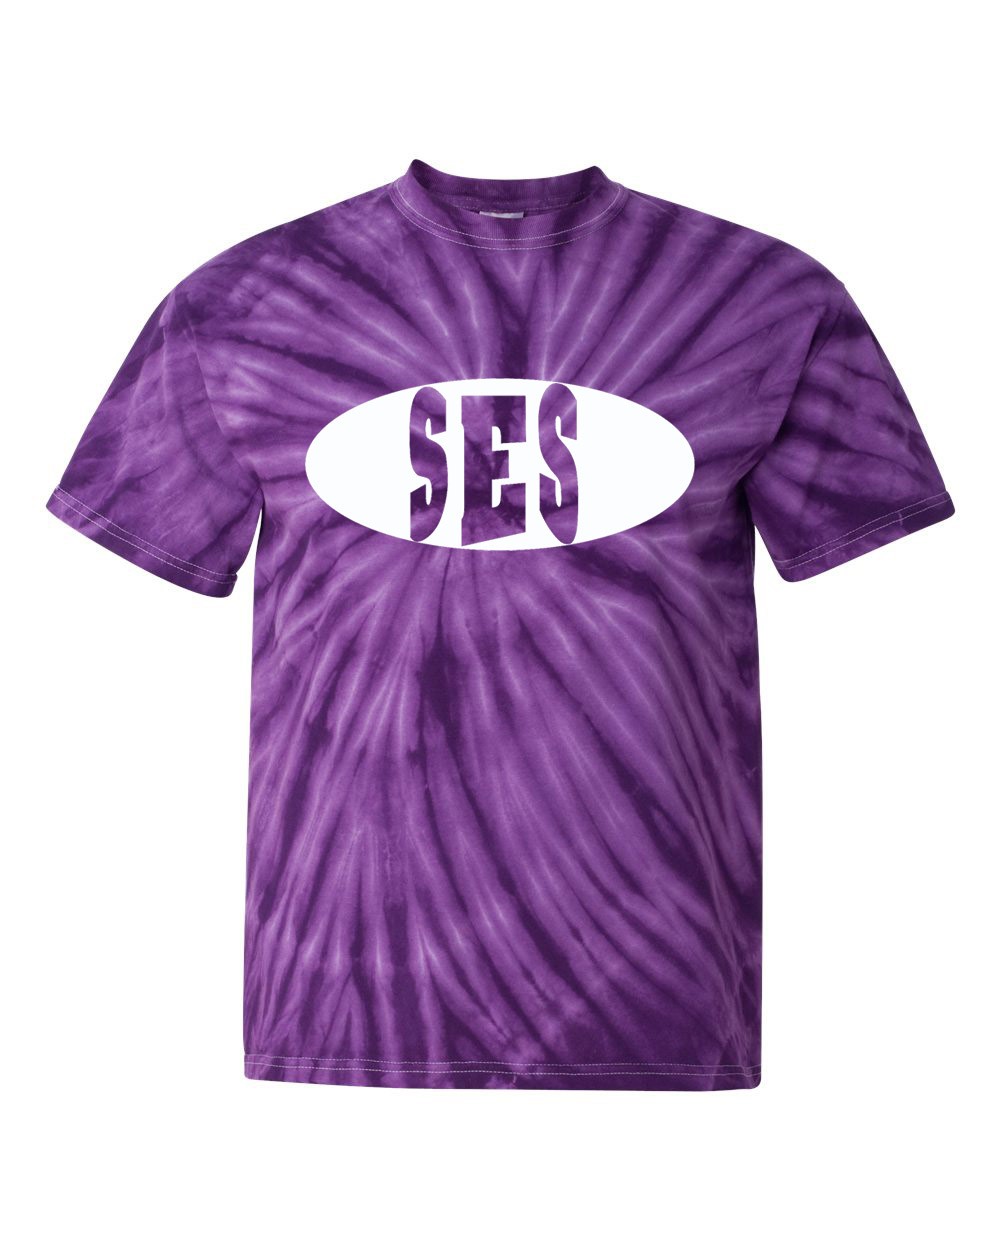 SES Spirit S/S Tie Dye T-Shirt w/ White Logo - Please Allow 2-3 Weeks for Delivery